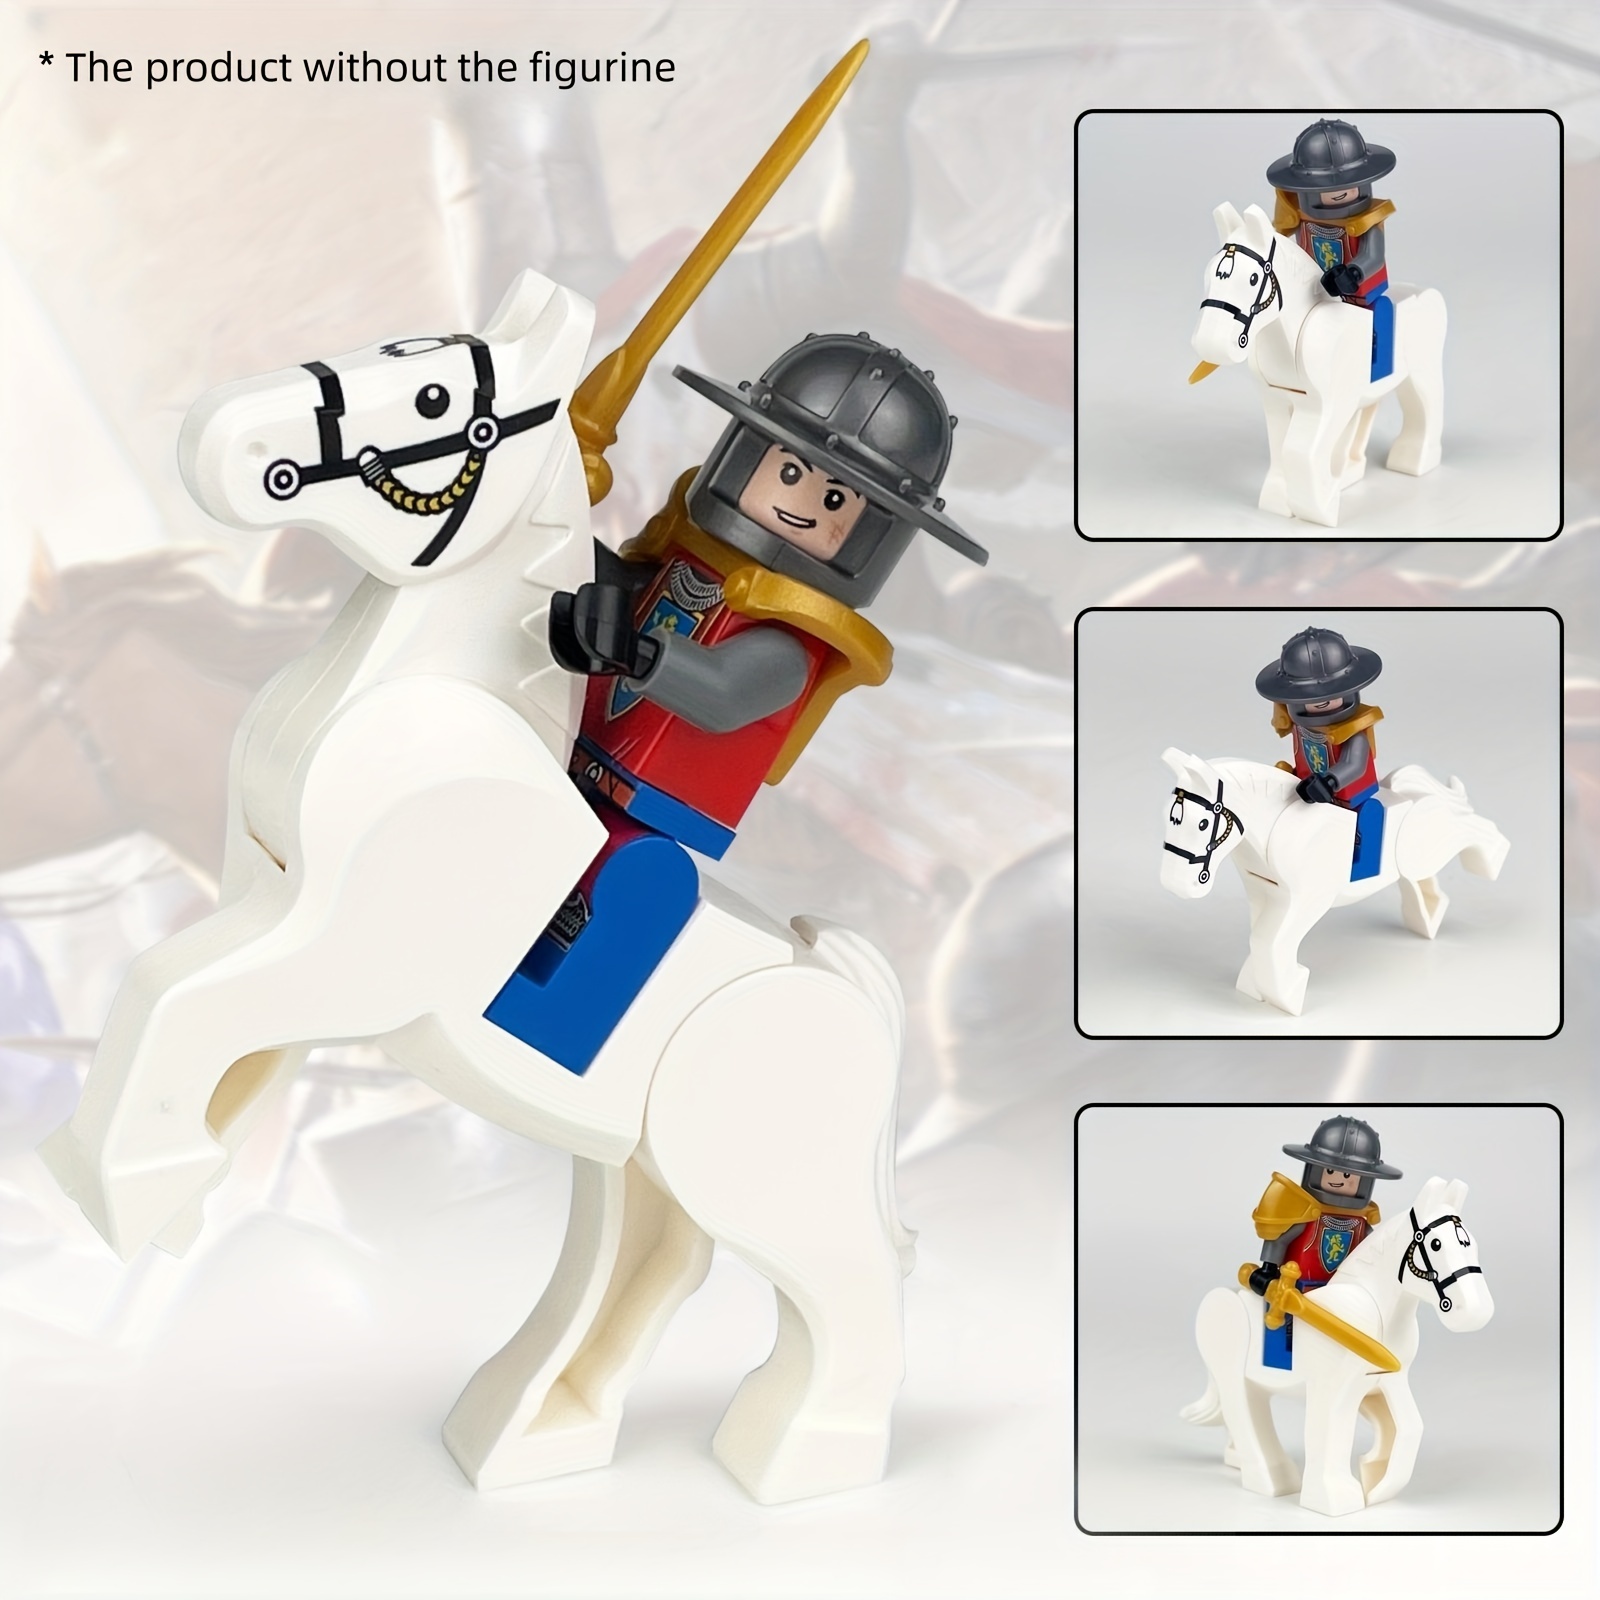 

4pcs Medieval Infantry Ranger Knight Horse, Epic Battle Building Block Collection For Anime Movies Fans, Action Figures Series Building Block Kit, Christmas Gift